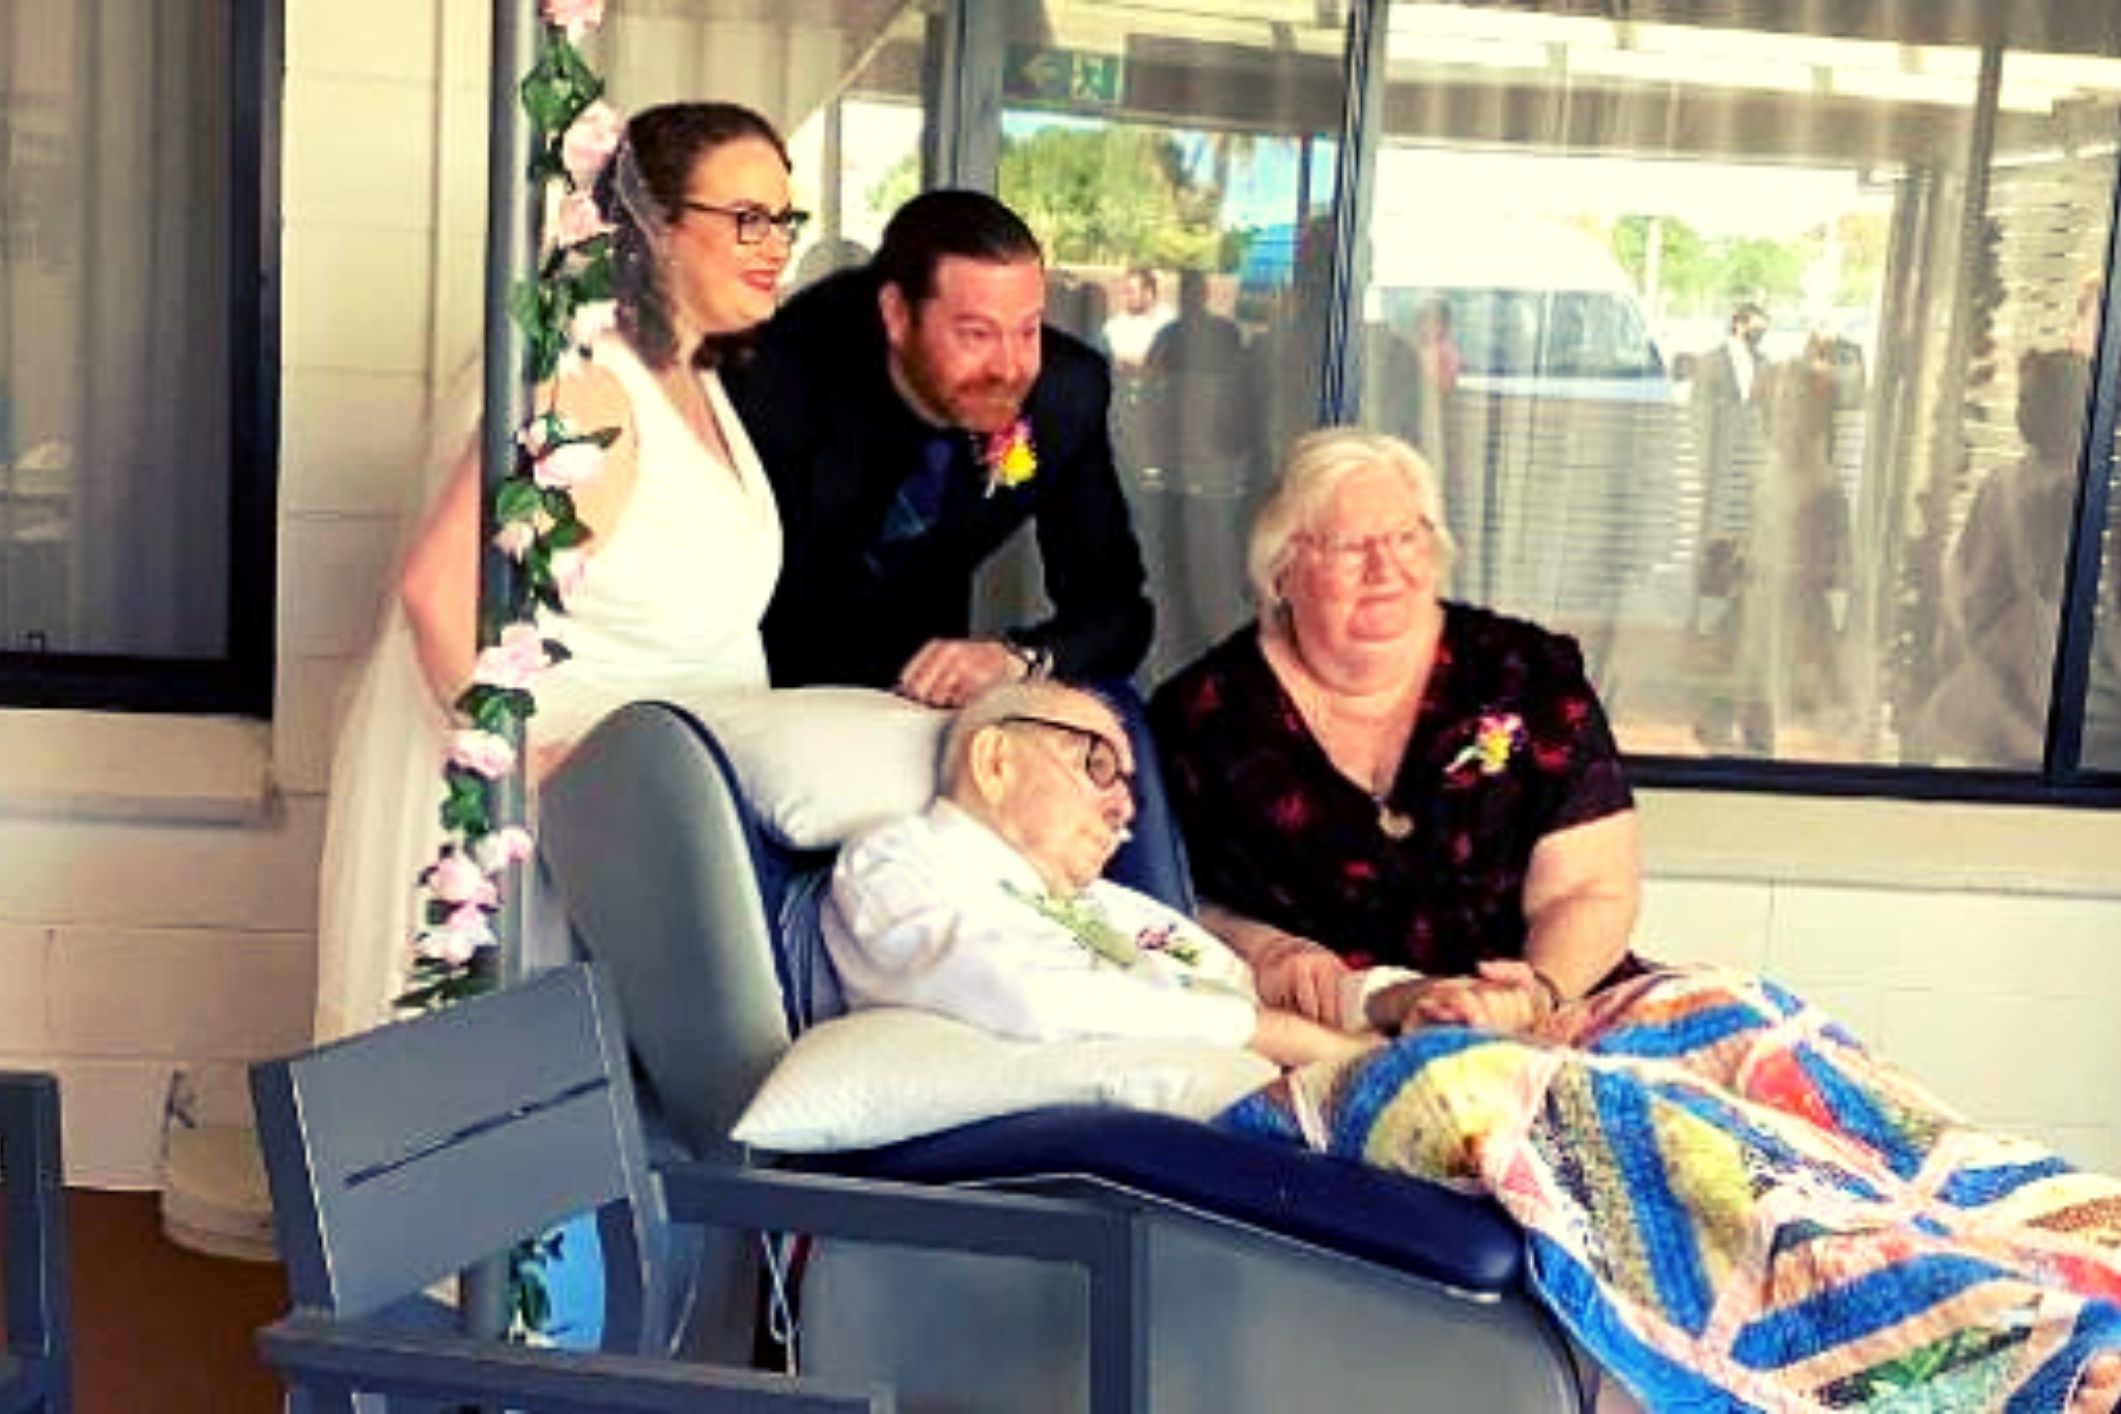 Groom gets married in aged care home where his father and grandmother are residents